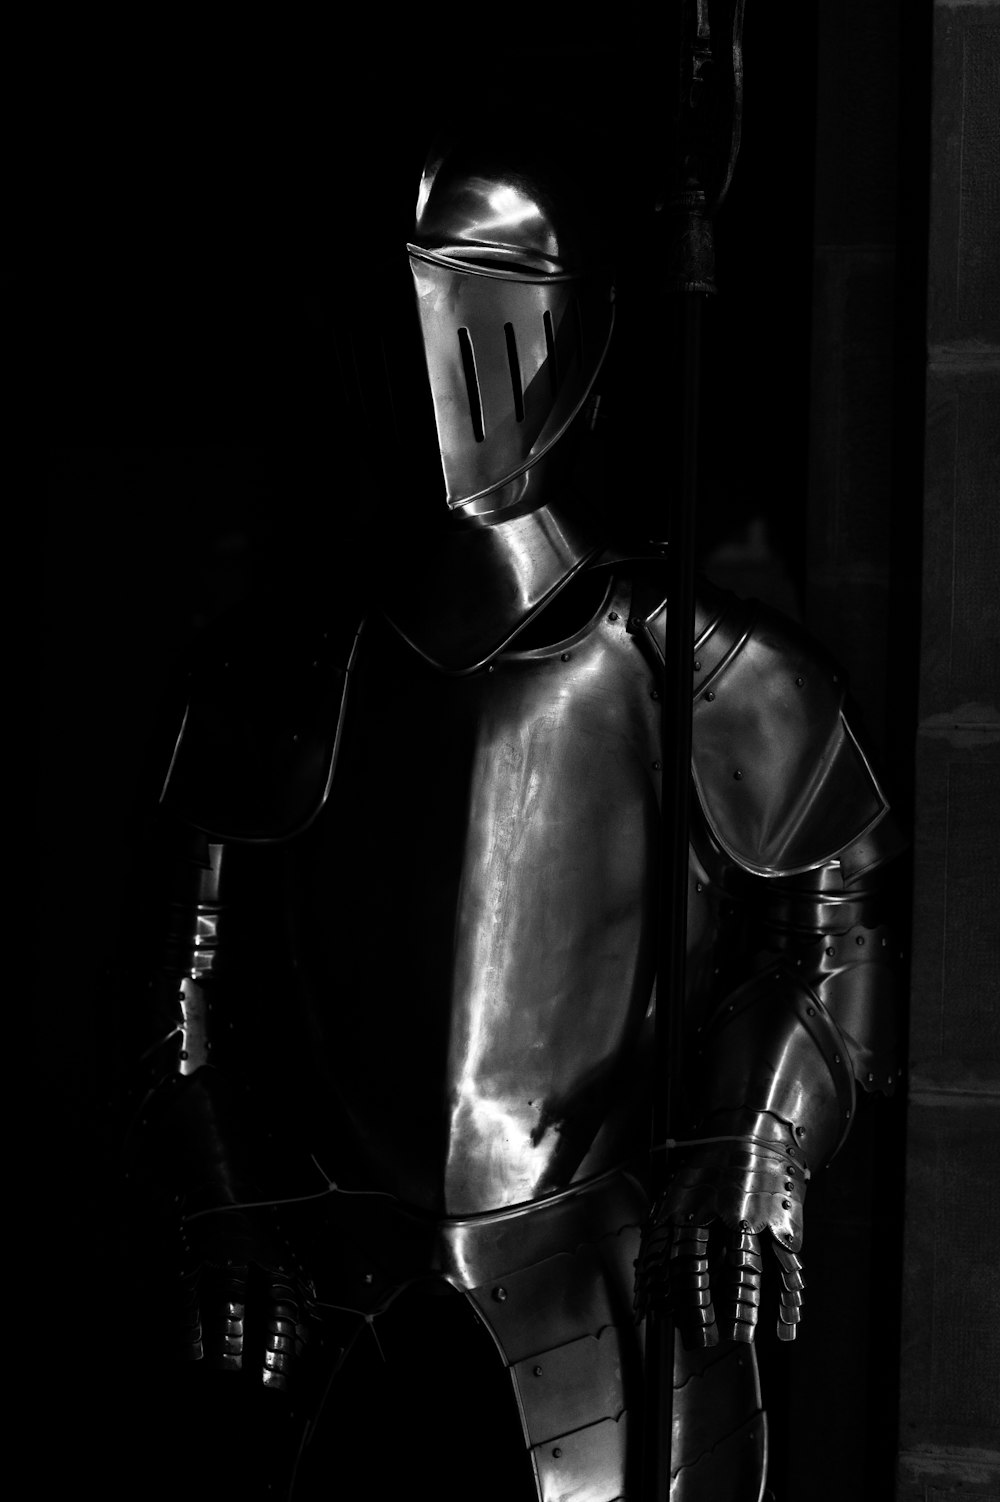 grayscale photography of armor